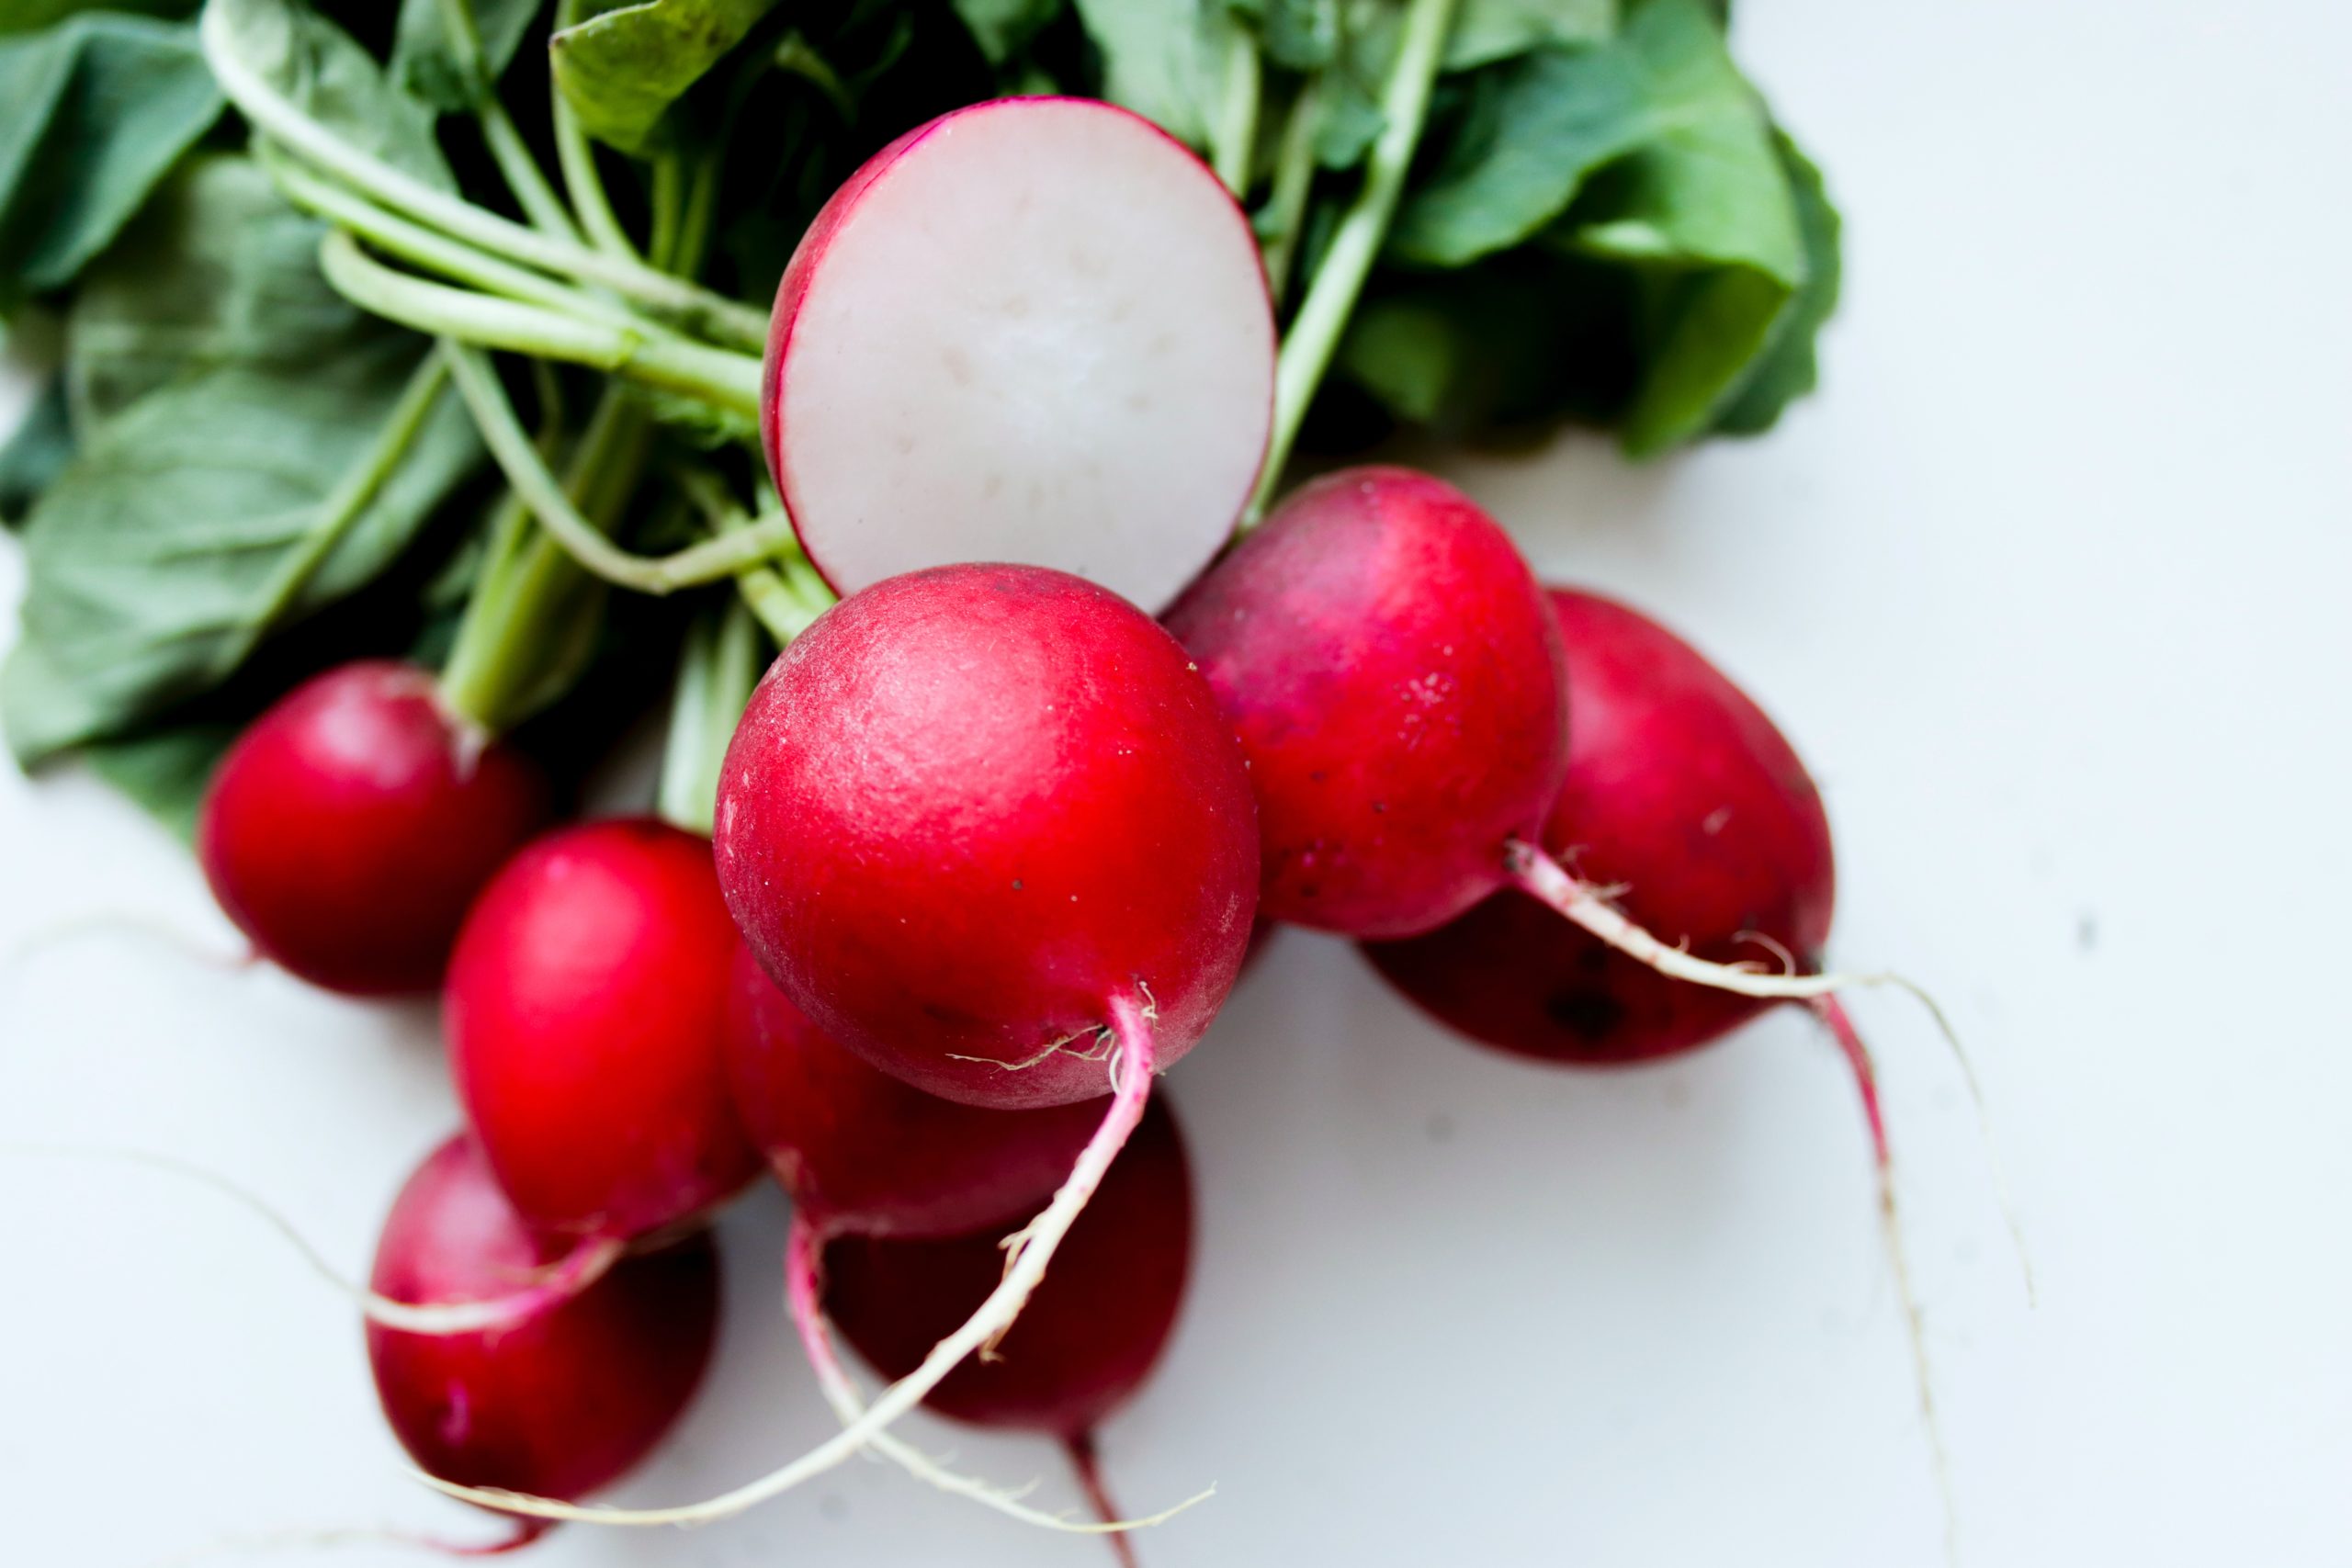 can dogs eat radishes